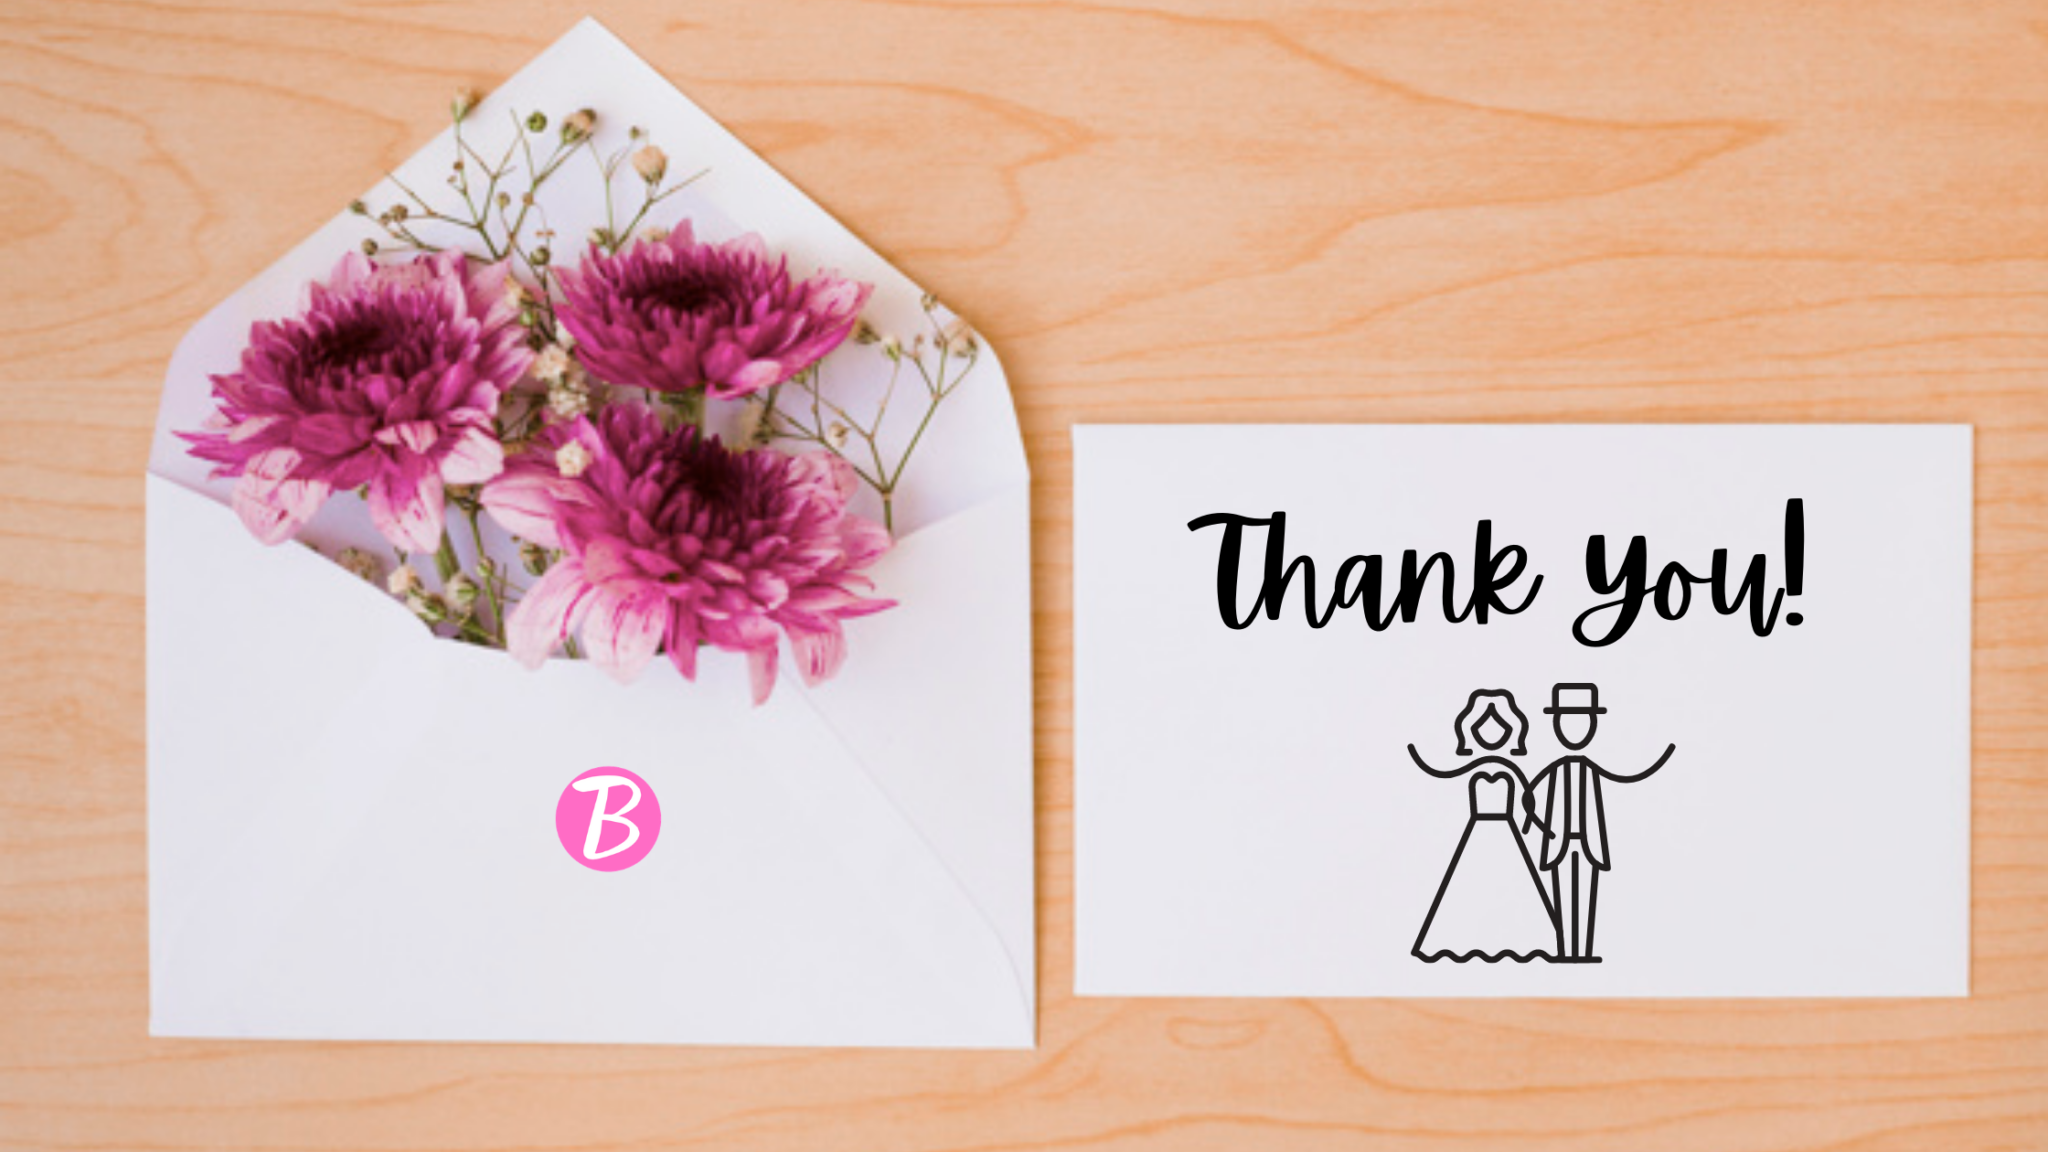 Thank You Cards With Pictures For Wedding